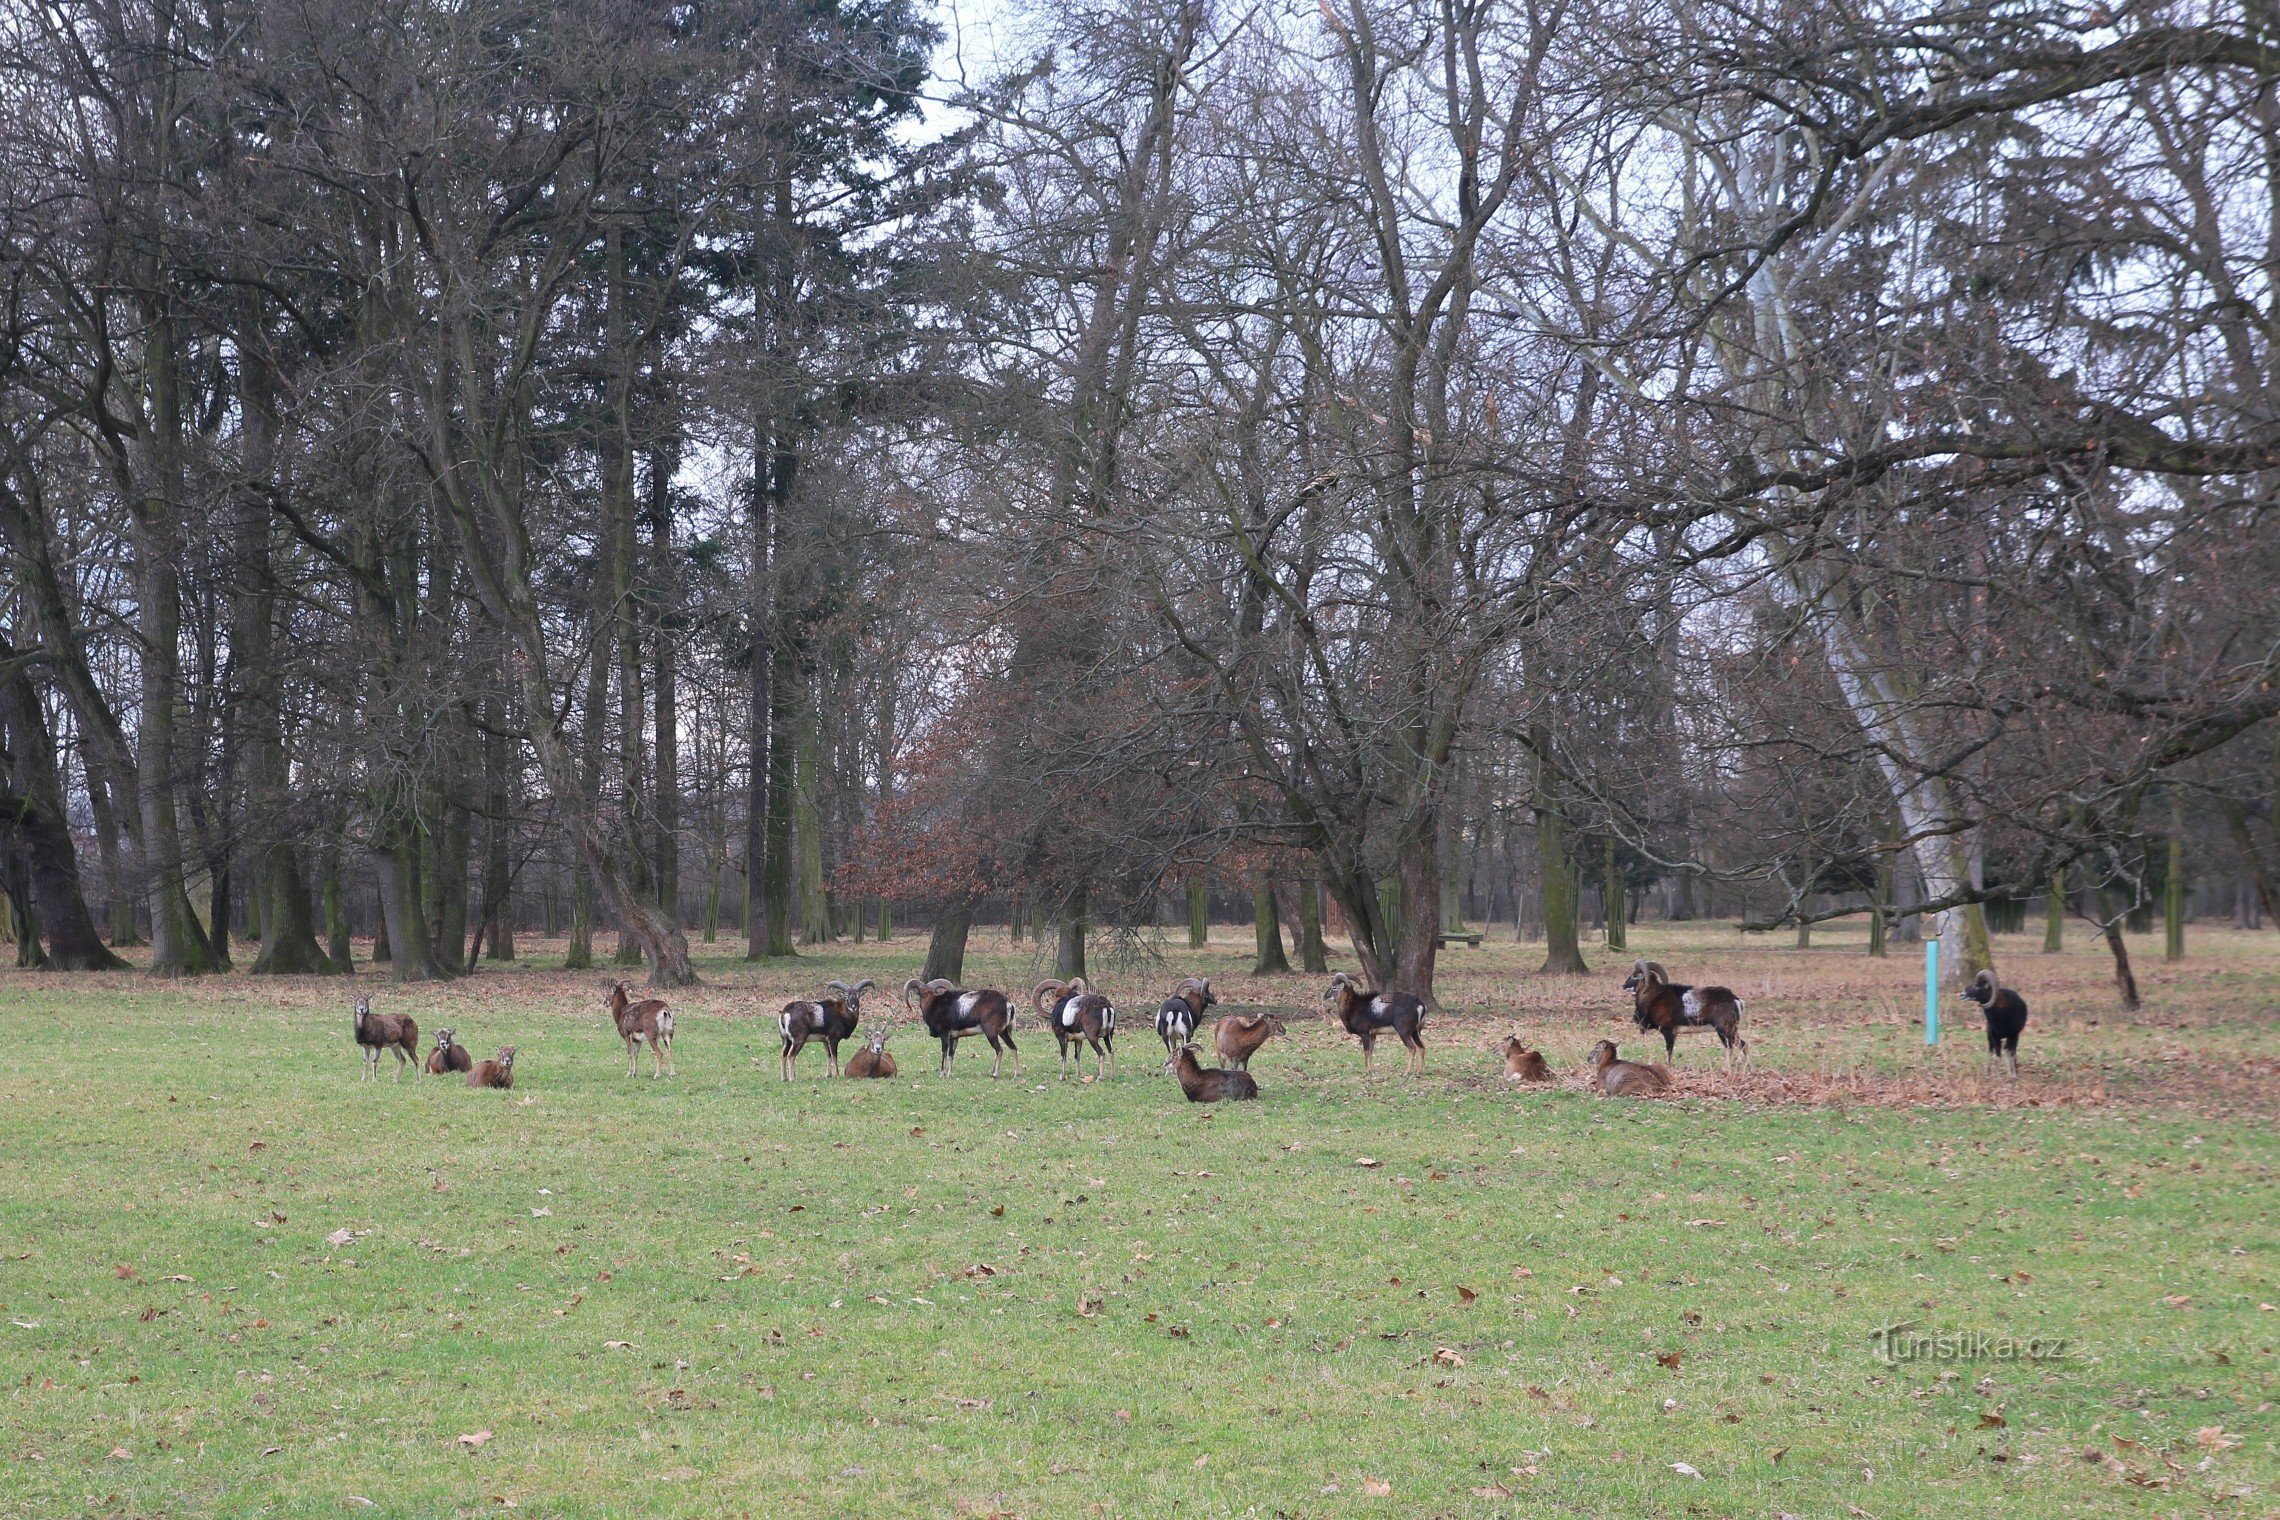 Herd of game in the castle park